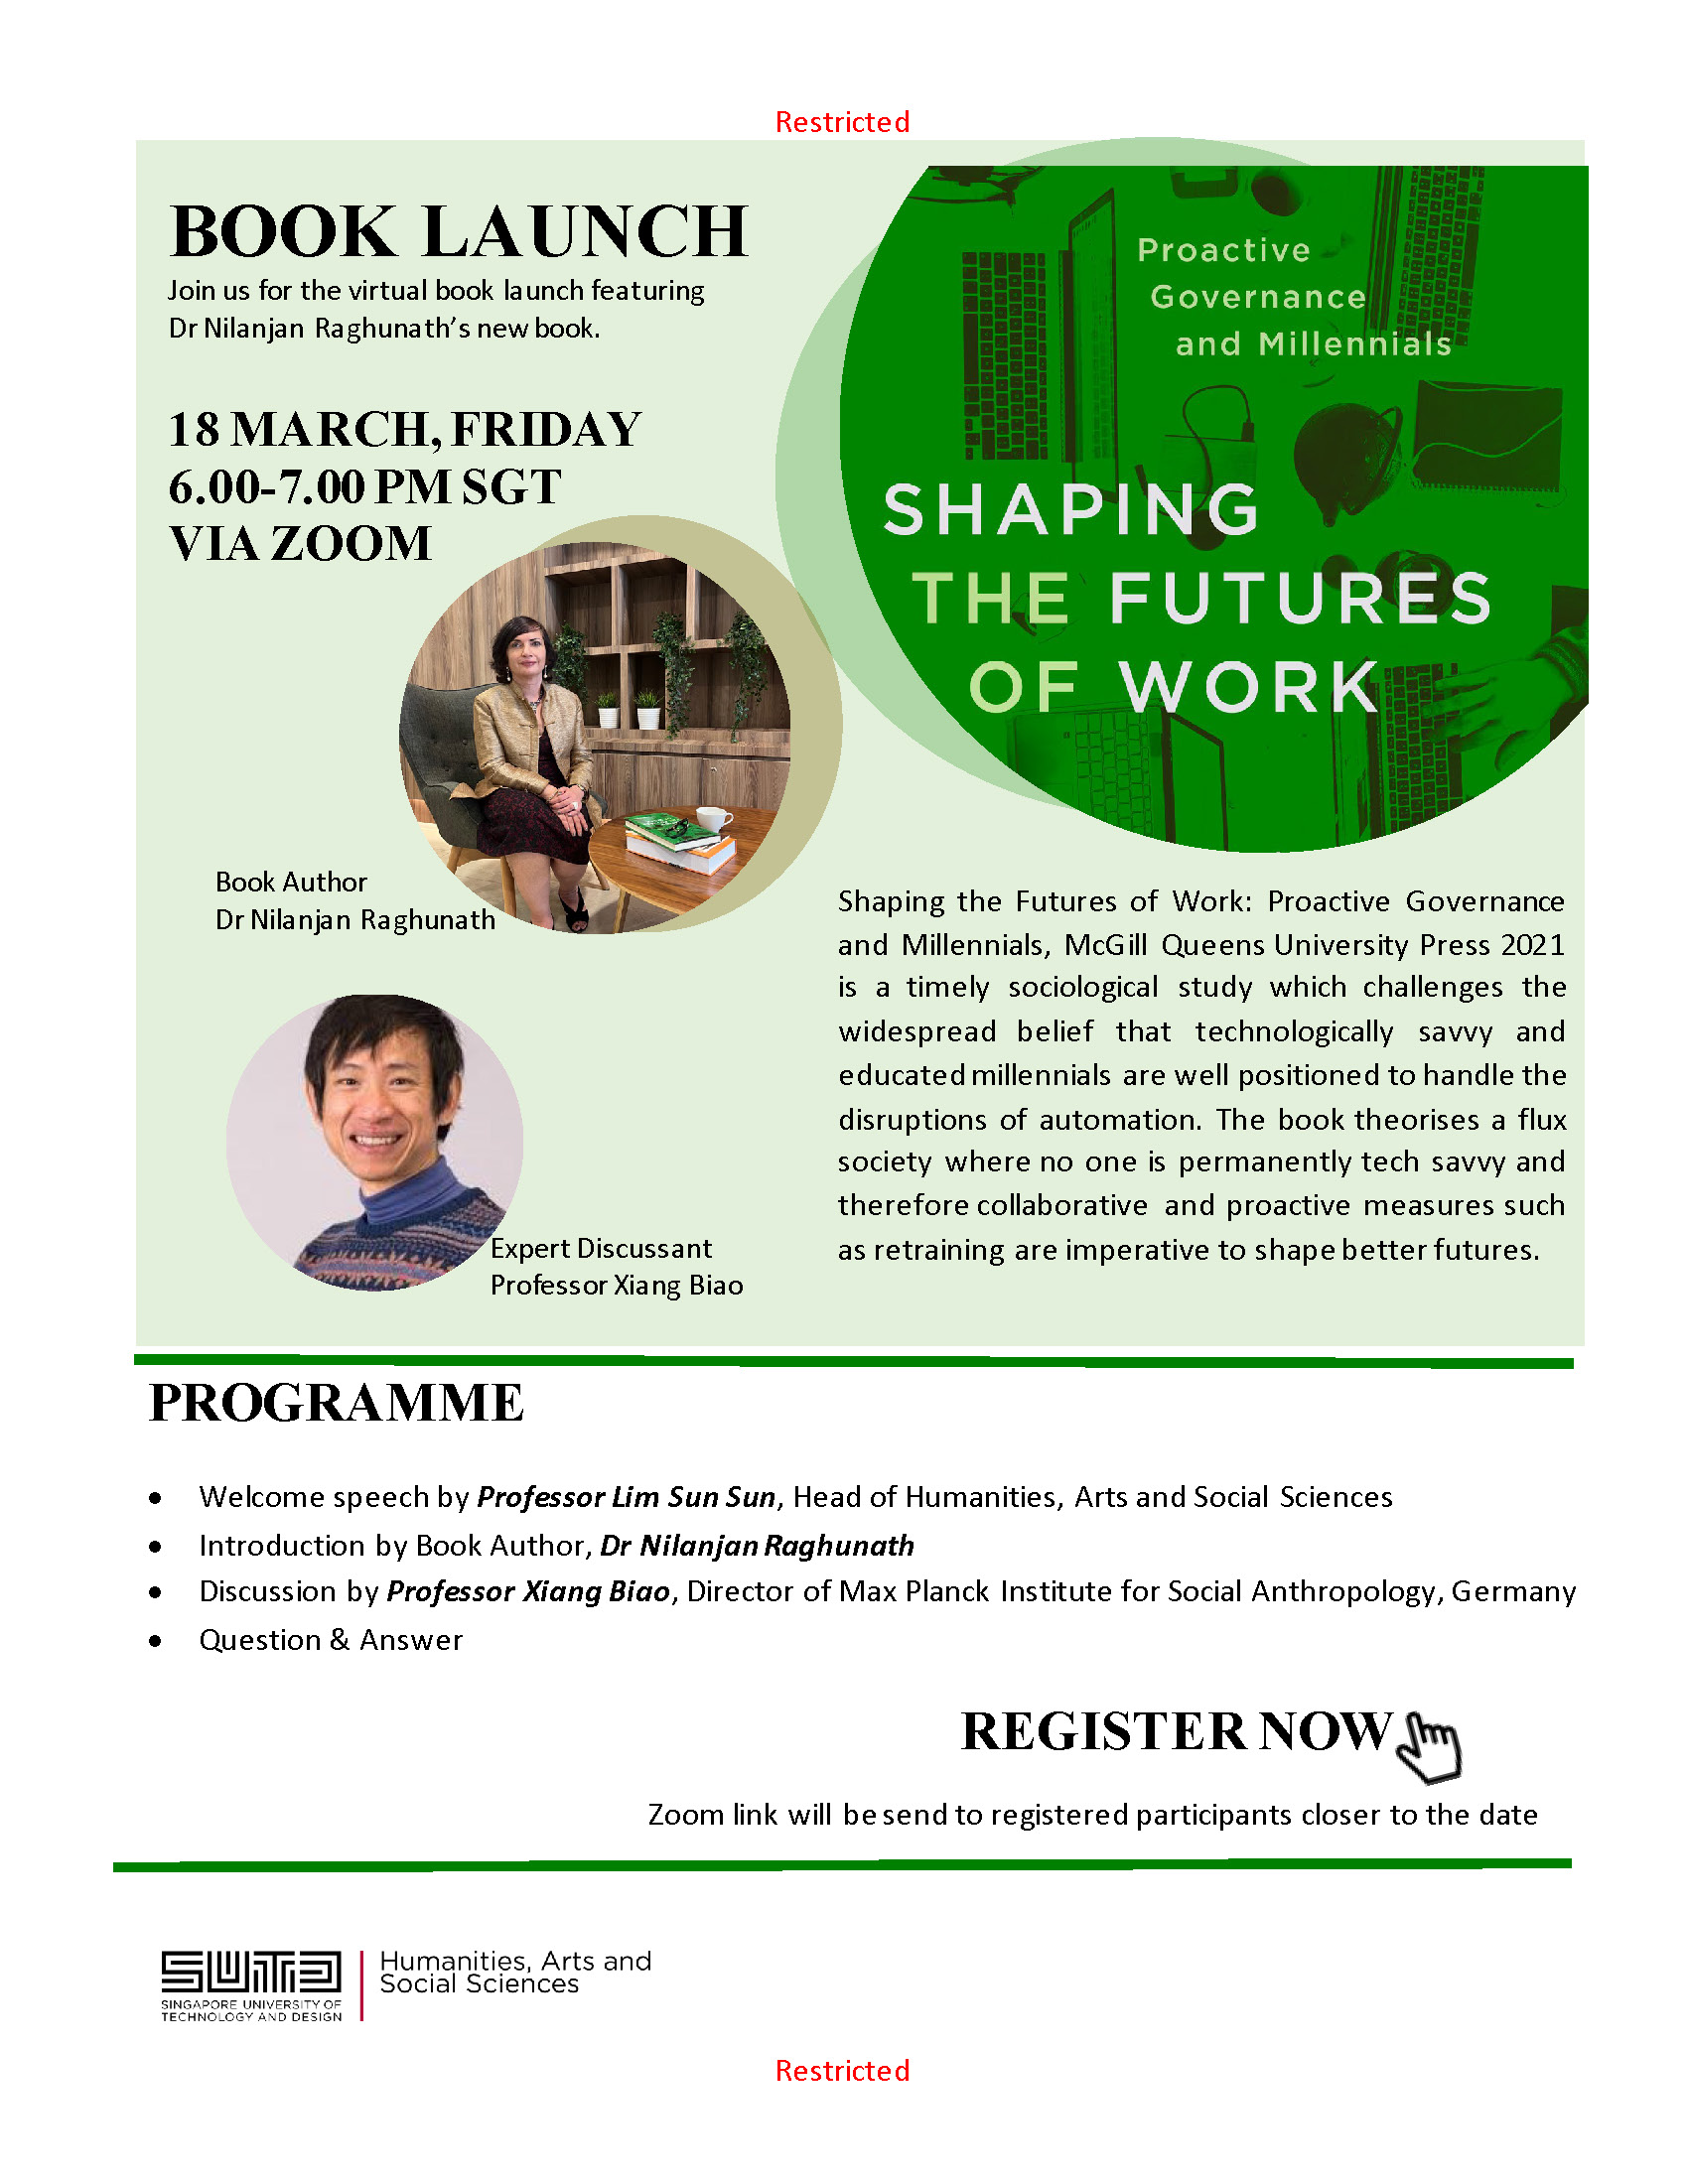 Virtual Book Launch featuring Dr Nilanjan Raghunath's new book : Shaping the Futures of Work